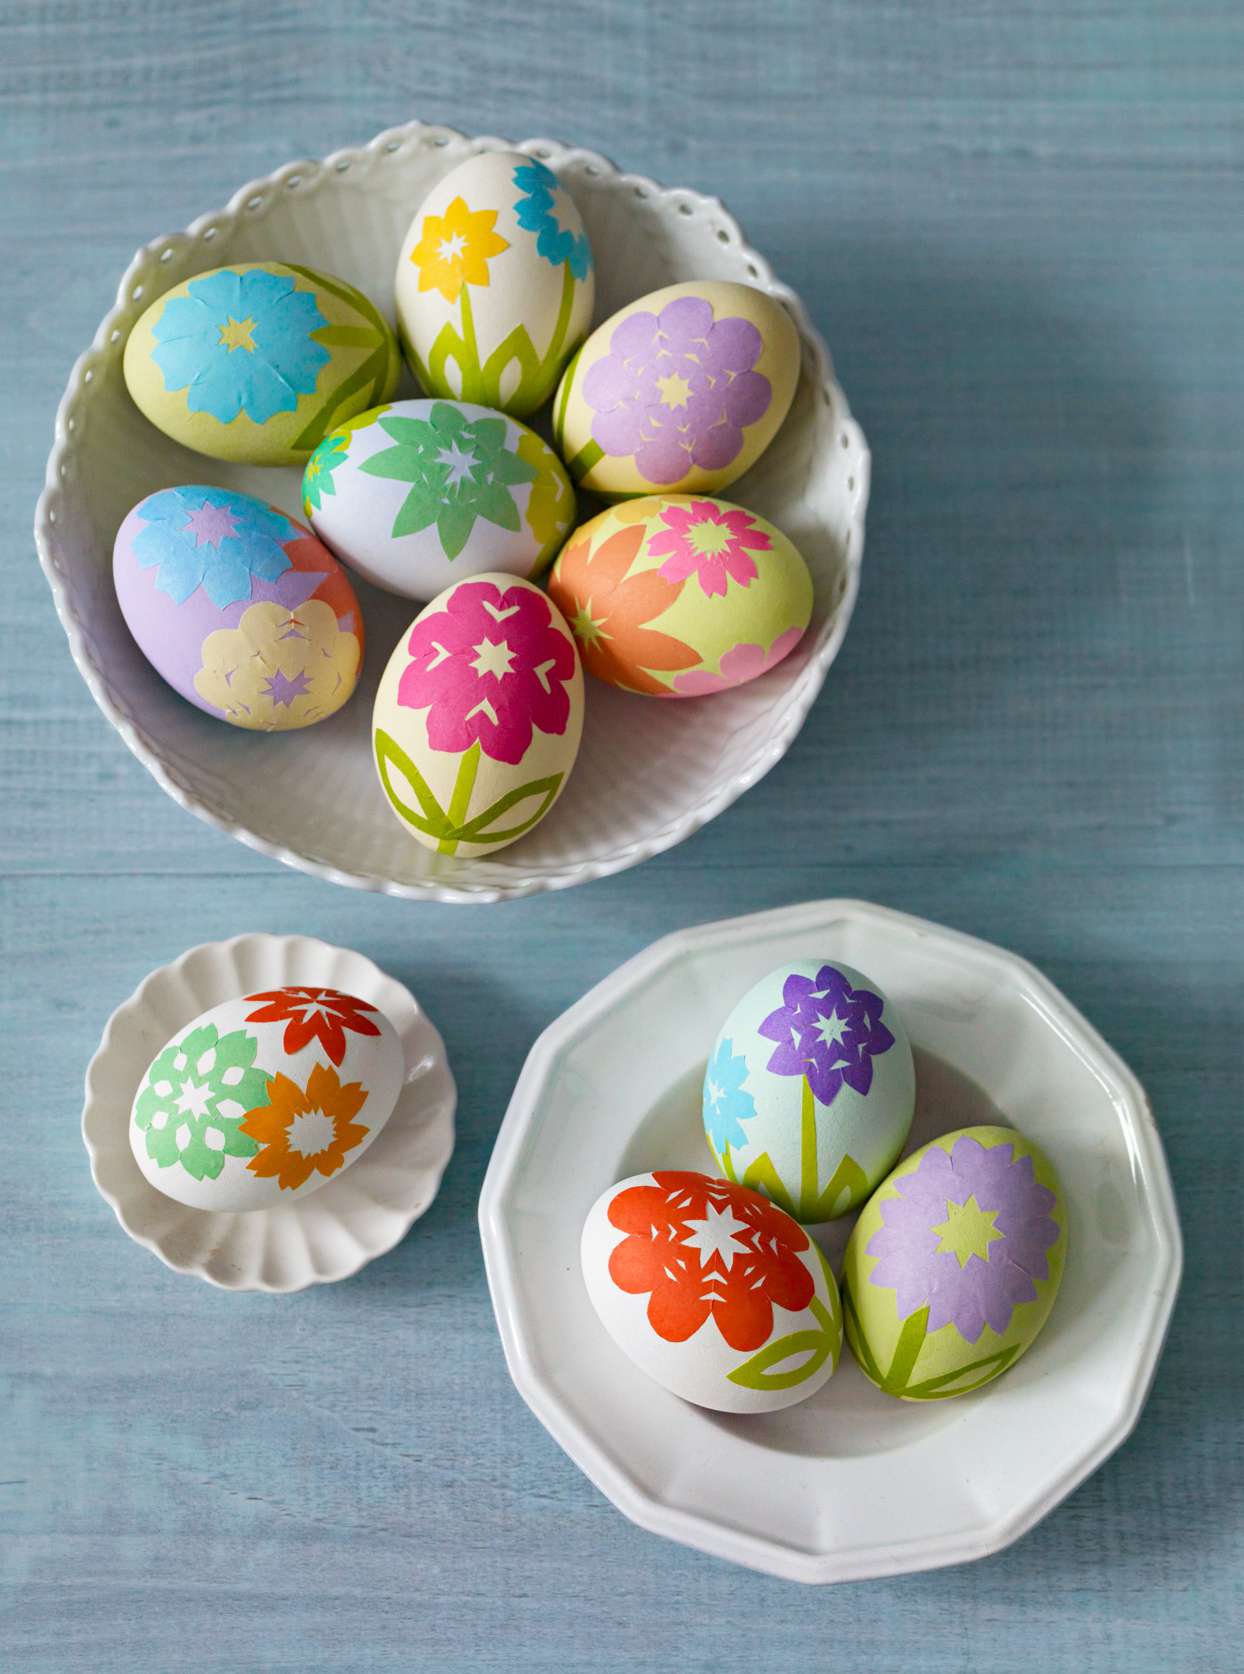 paper flowers on eggs in 3 white bowls